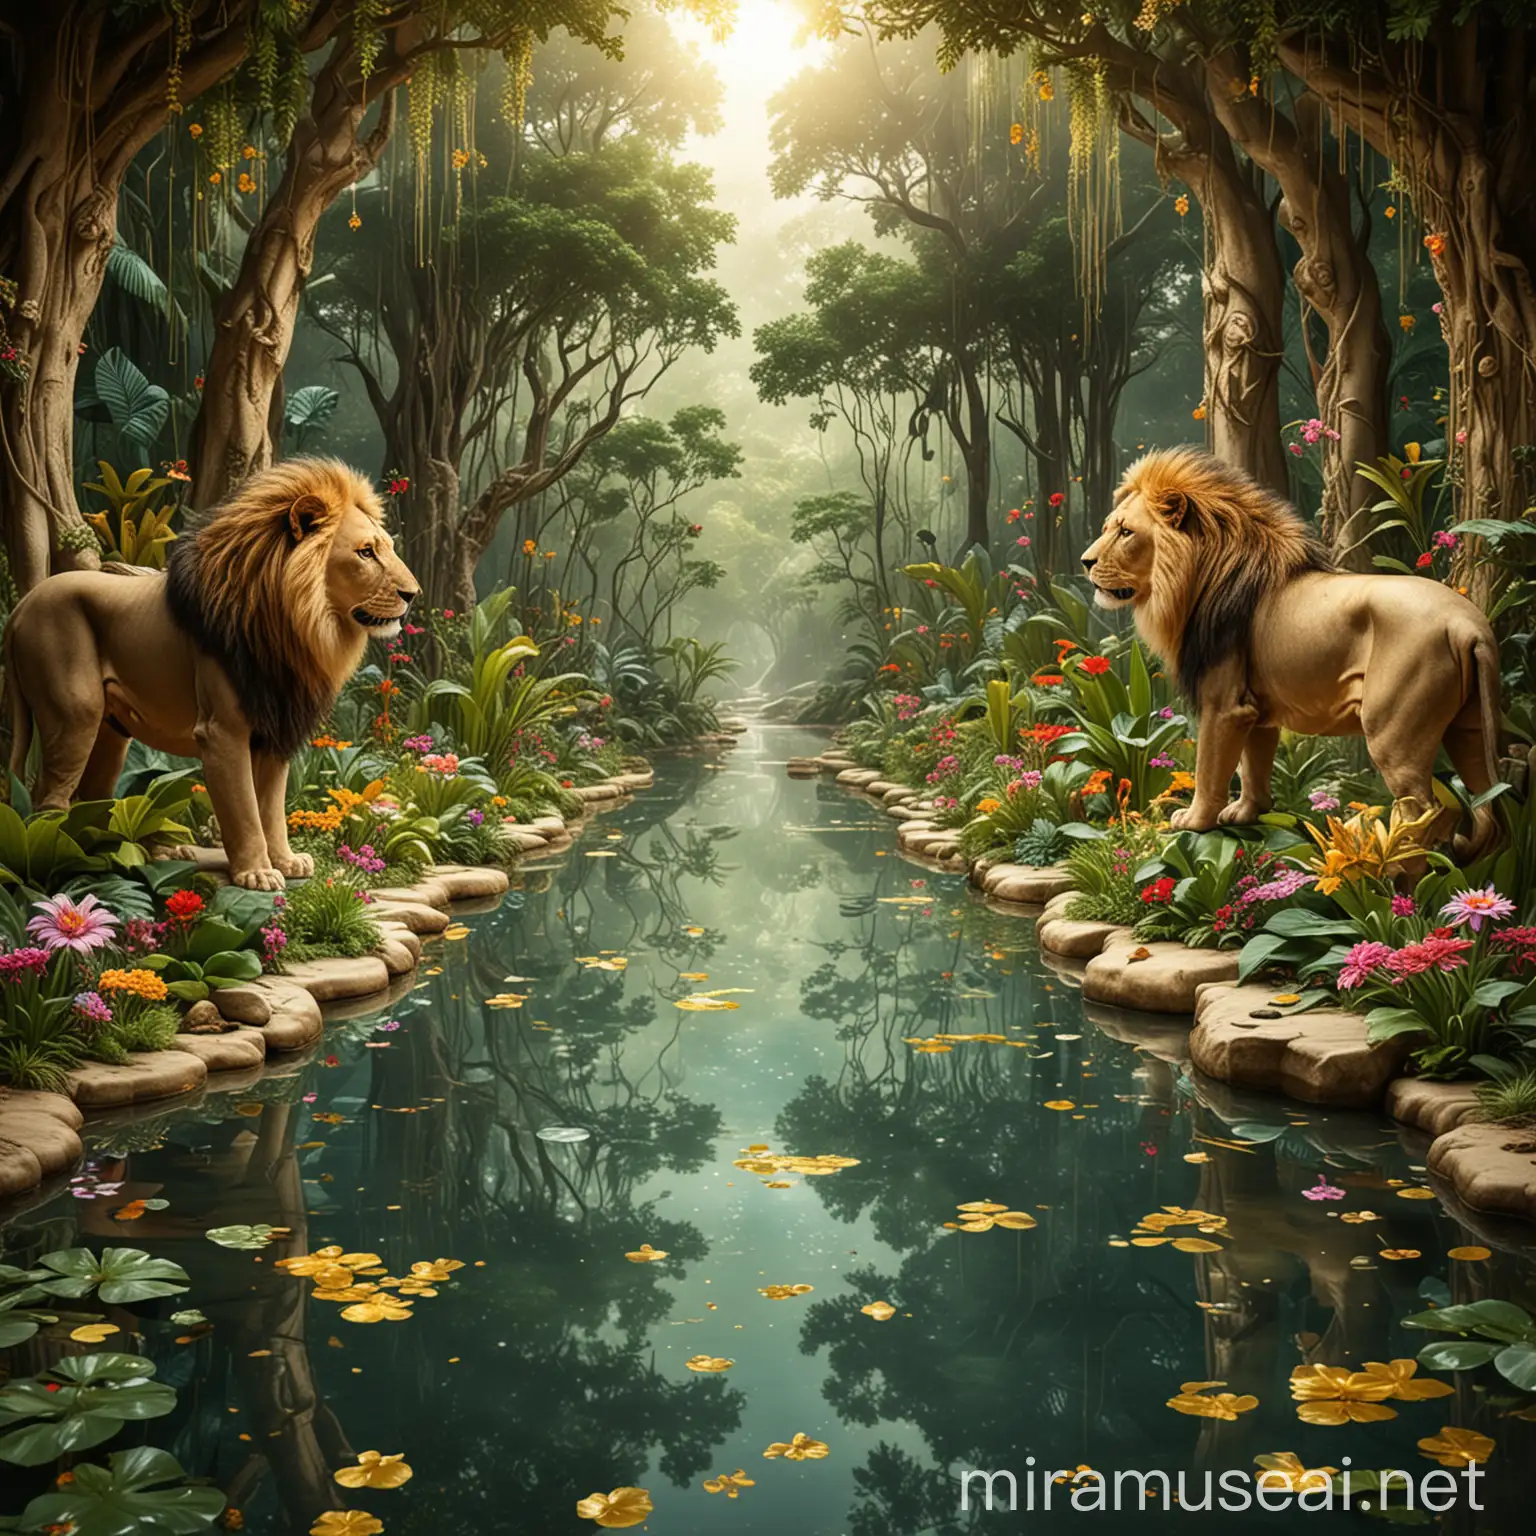 a jungle background with magical flowers and rivers and trees with lions and golden glass floor


